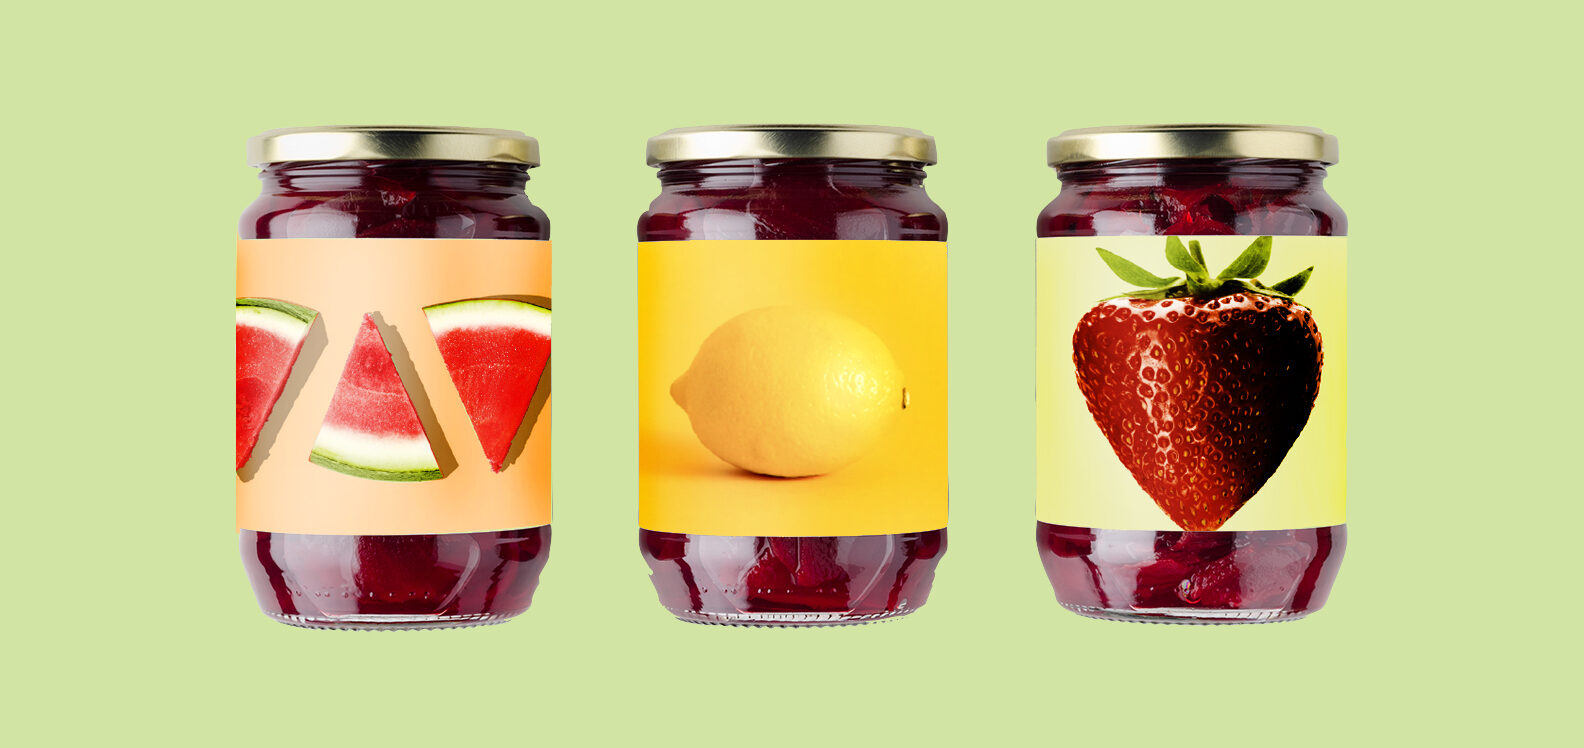 Food safety approved pickled beets in jars